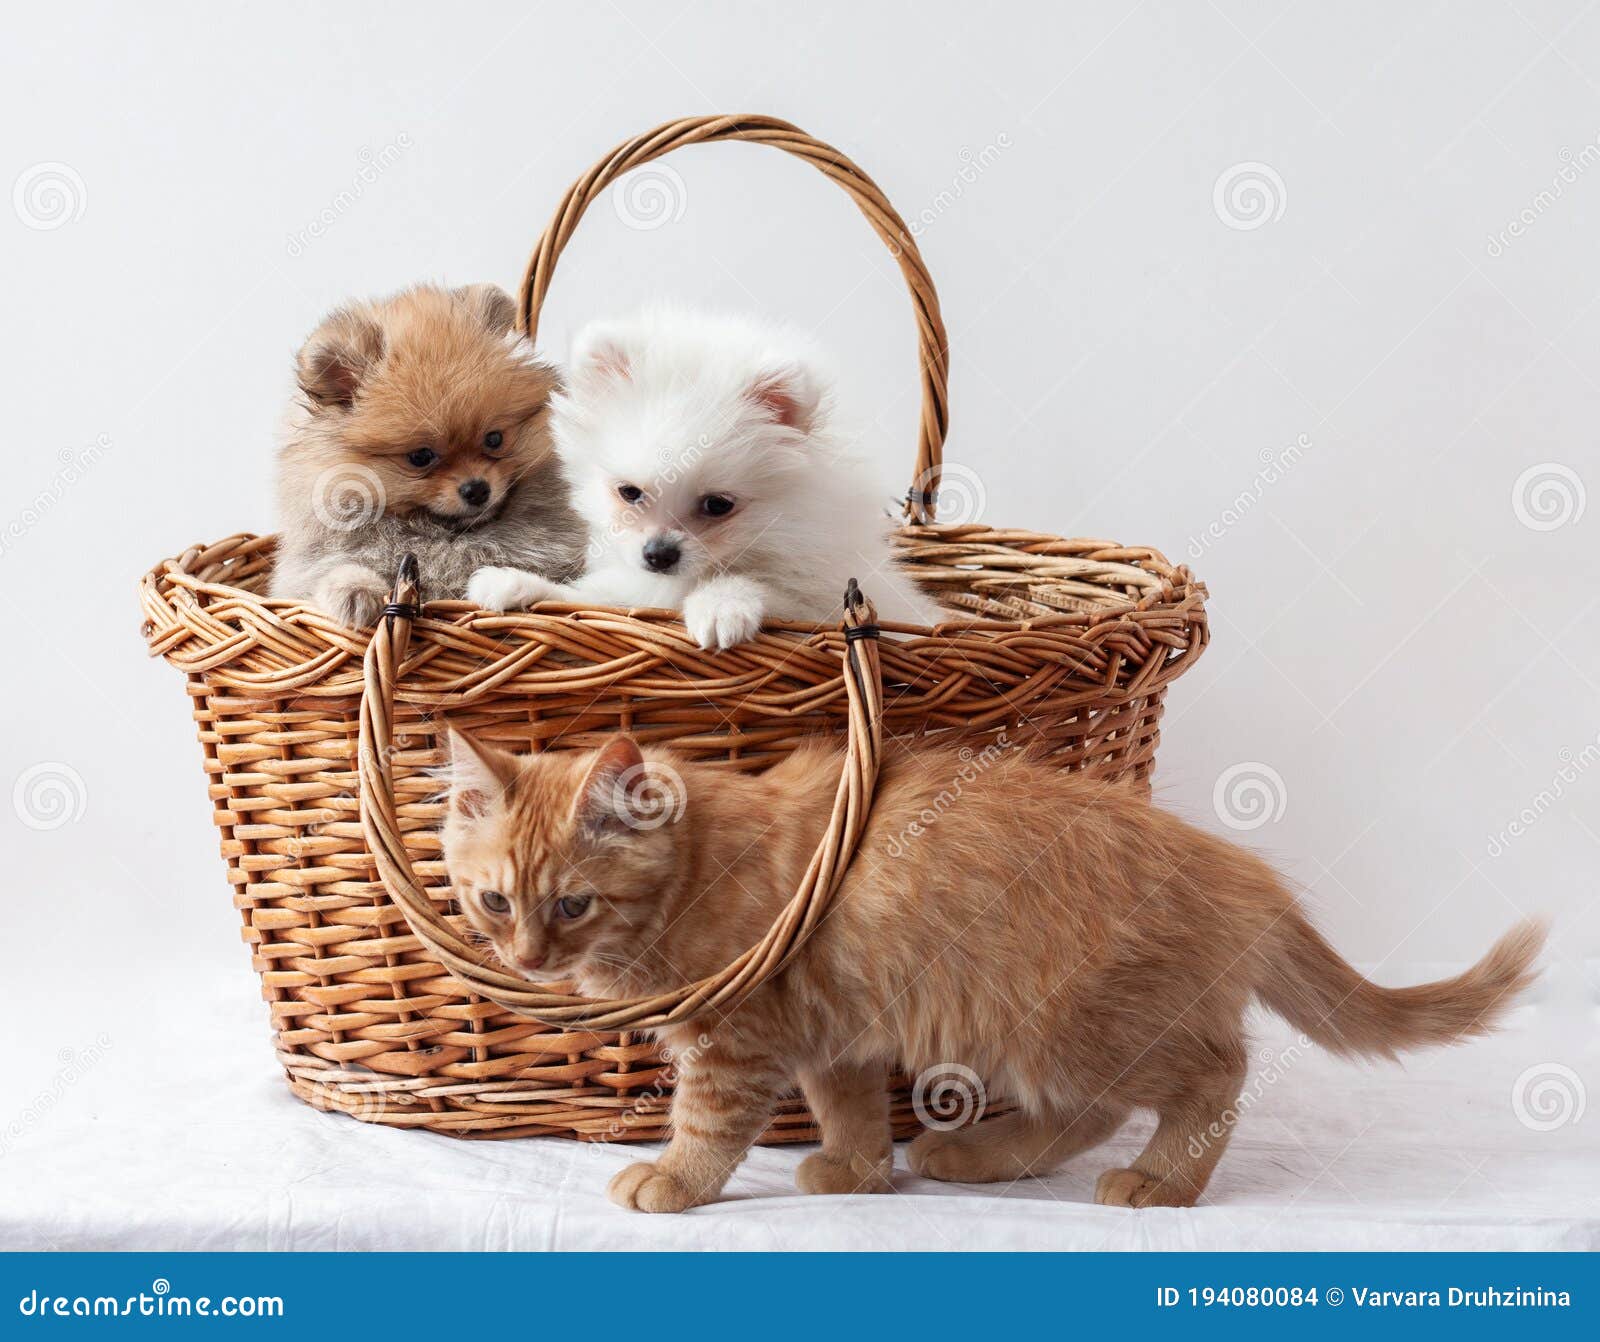 two fluffy pomeranian puppies of white and sable color sit in a basket, in front of which a red tabby kitten passes